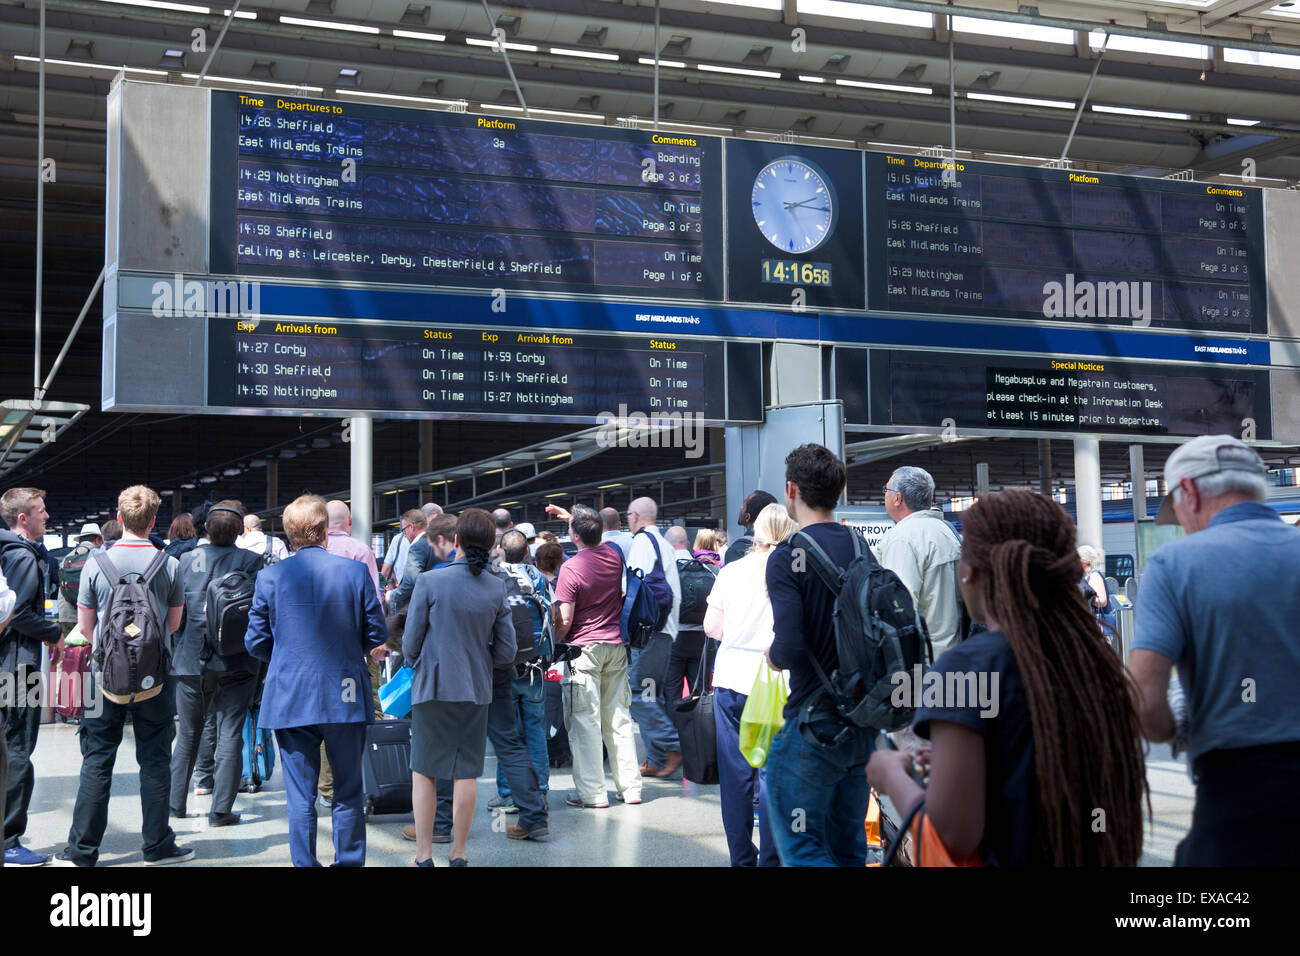 People checking times at a train station during London tube strike 9th July 2015 - St Pancras Station Stock Photo